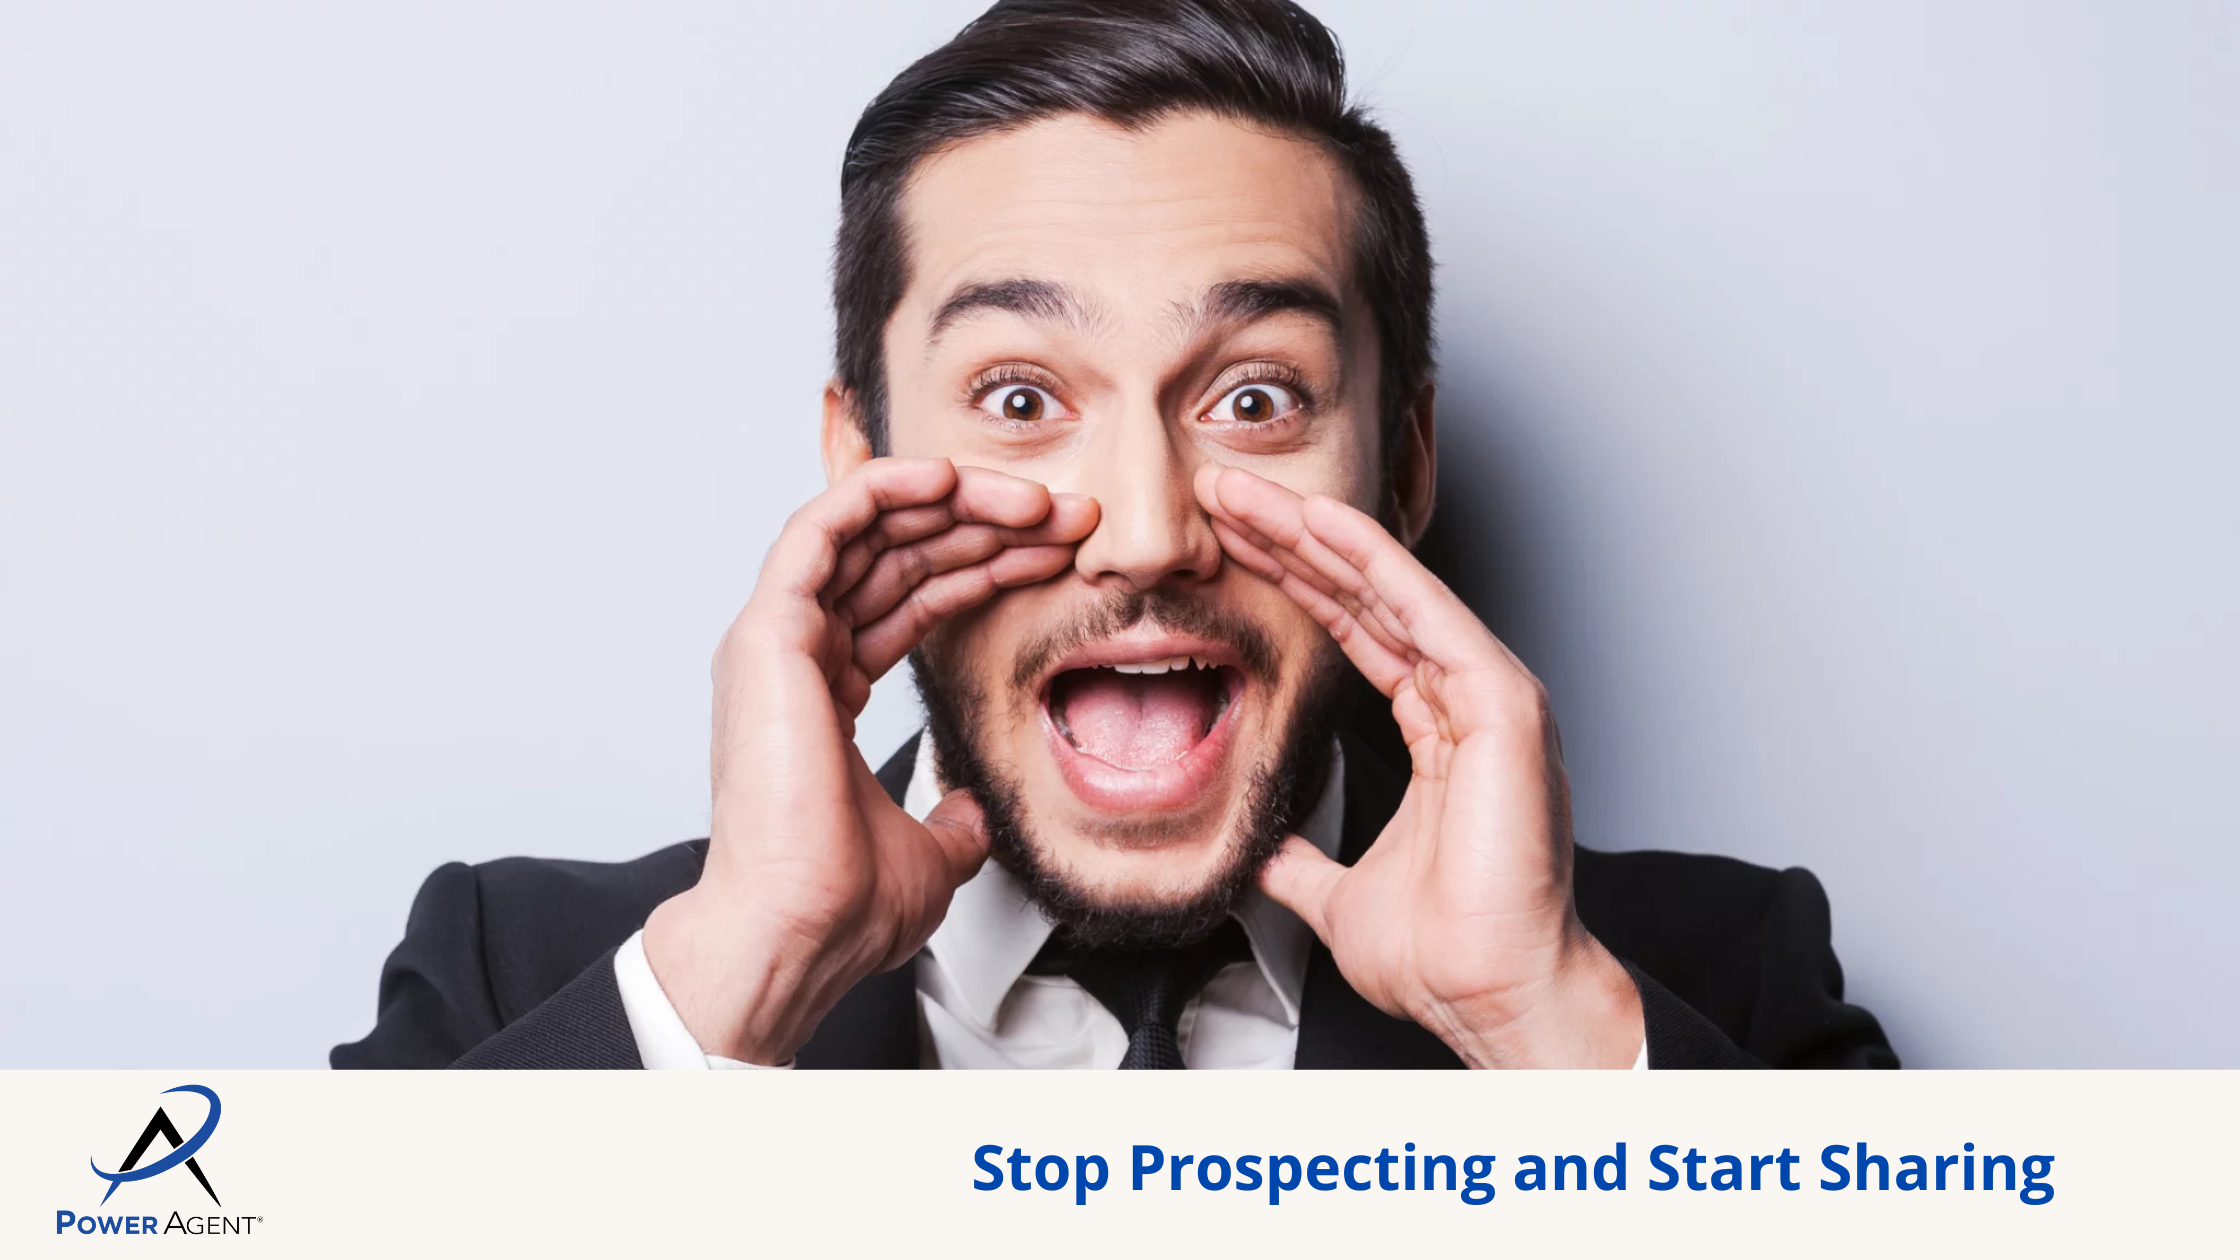 Stop Prospecting and Start Sharing